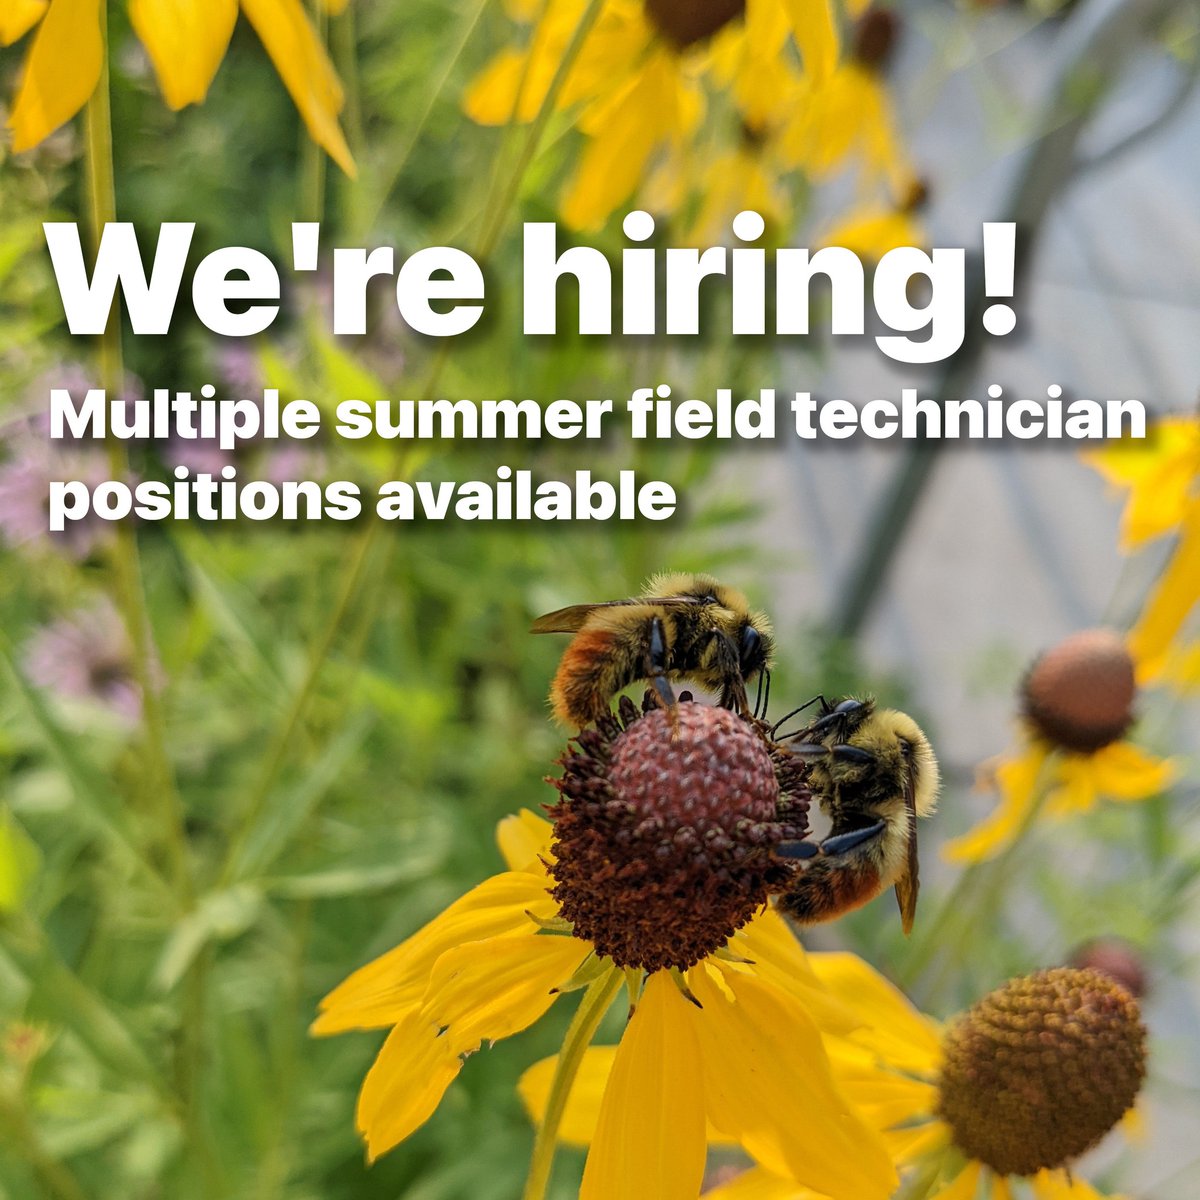 We're hiring technicians for multiple projects this summer!! 🌻🐝 Learn more: beelab.umn.edu/cariveau-lab/j…